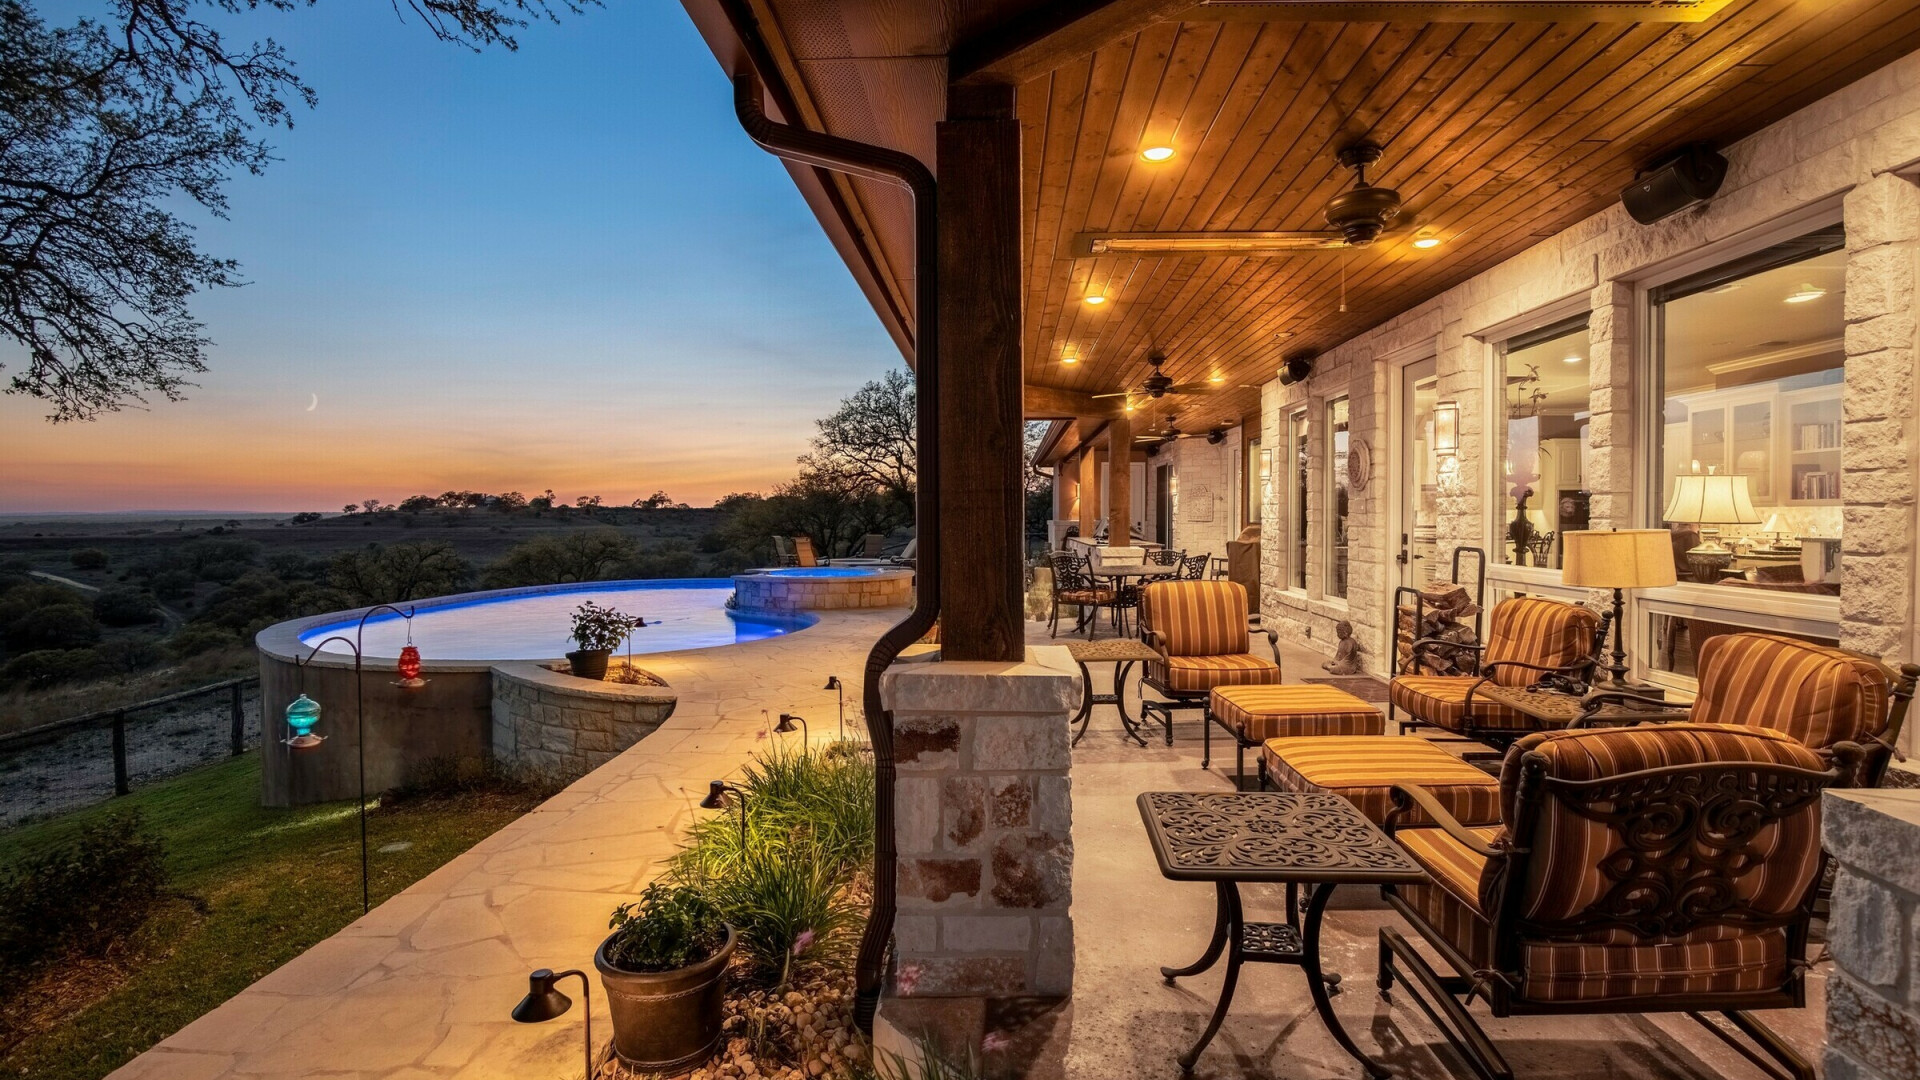 Texas Hill Country home nestled outside Johnson City with a beautiful outdoor living area, San Antonio TX